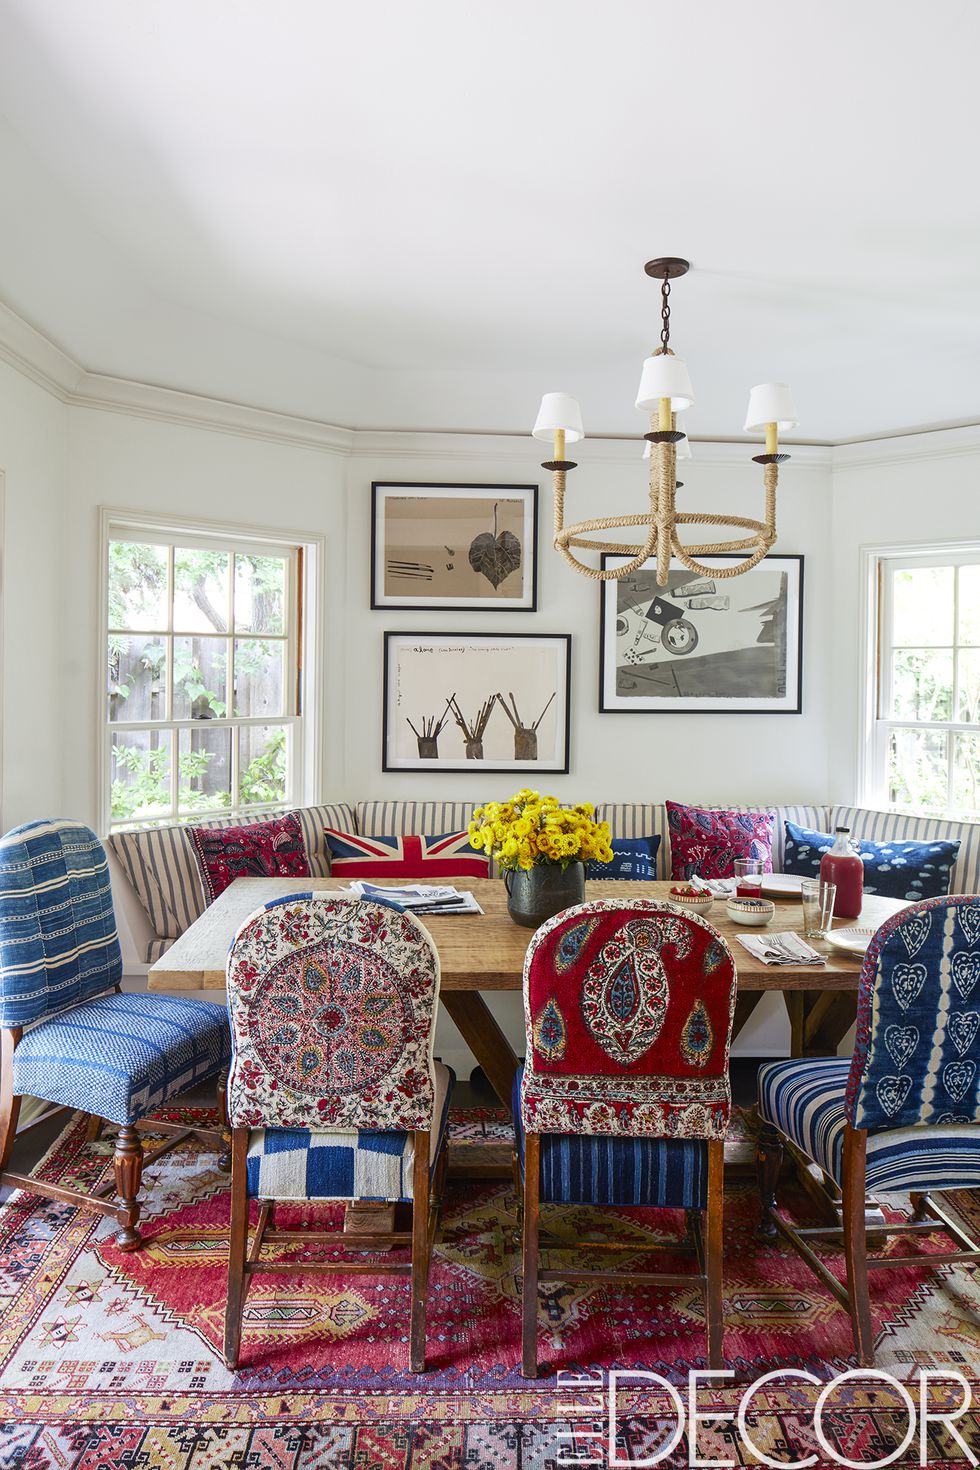 The chairs in the dining area came from Driver’s former house and were re-covered in vintage Islamic and African textiles, the banquette is covered in a Pindler stripe, the chandelier is by    Hollywood at Home   , the vintage rug is from   Jamal’s Rug Collection    and the watercolors are by   Konstantin Kakanias  .